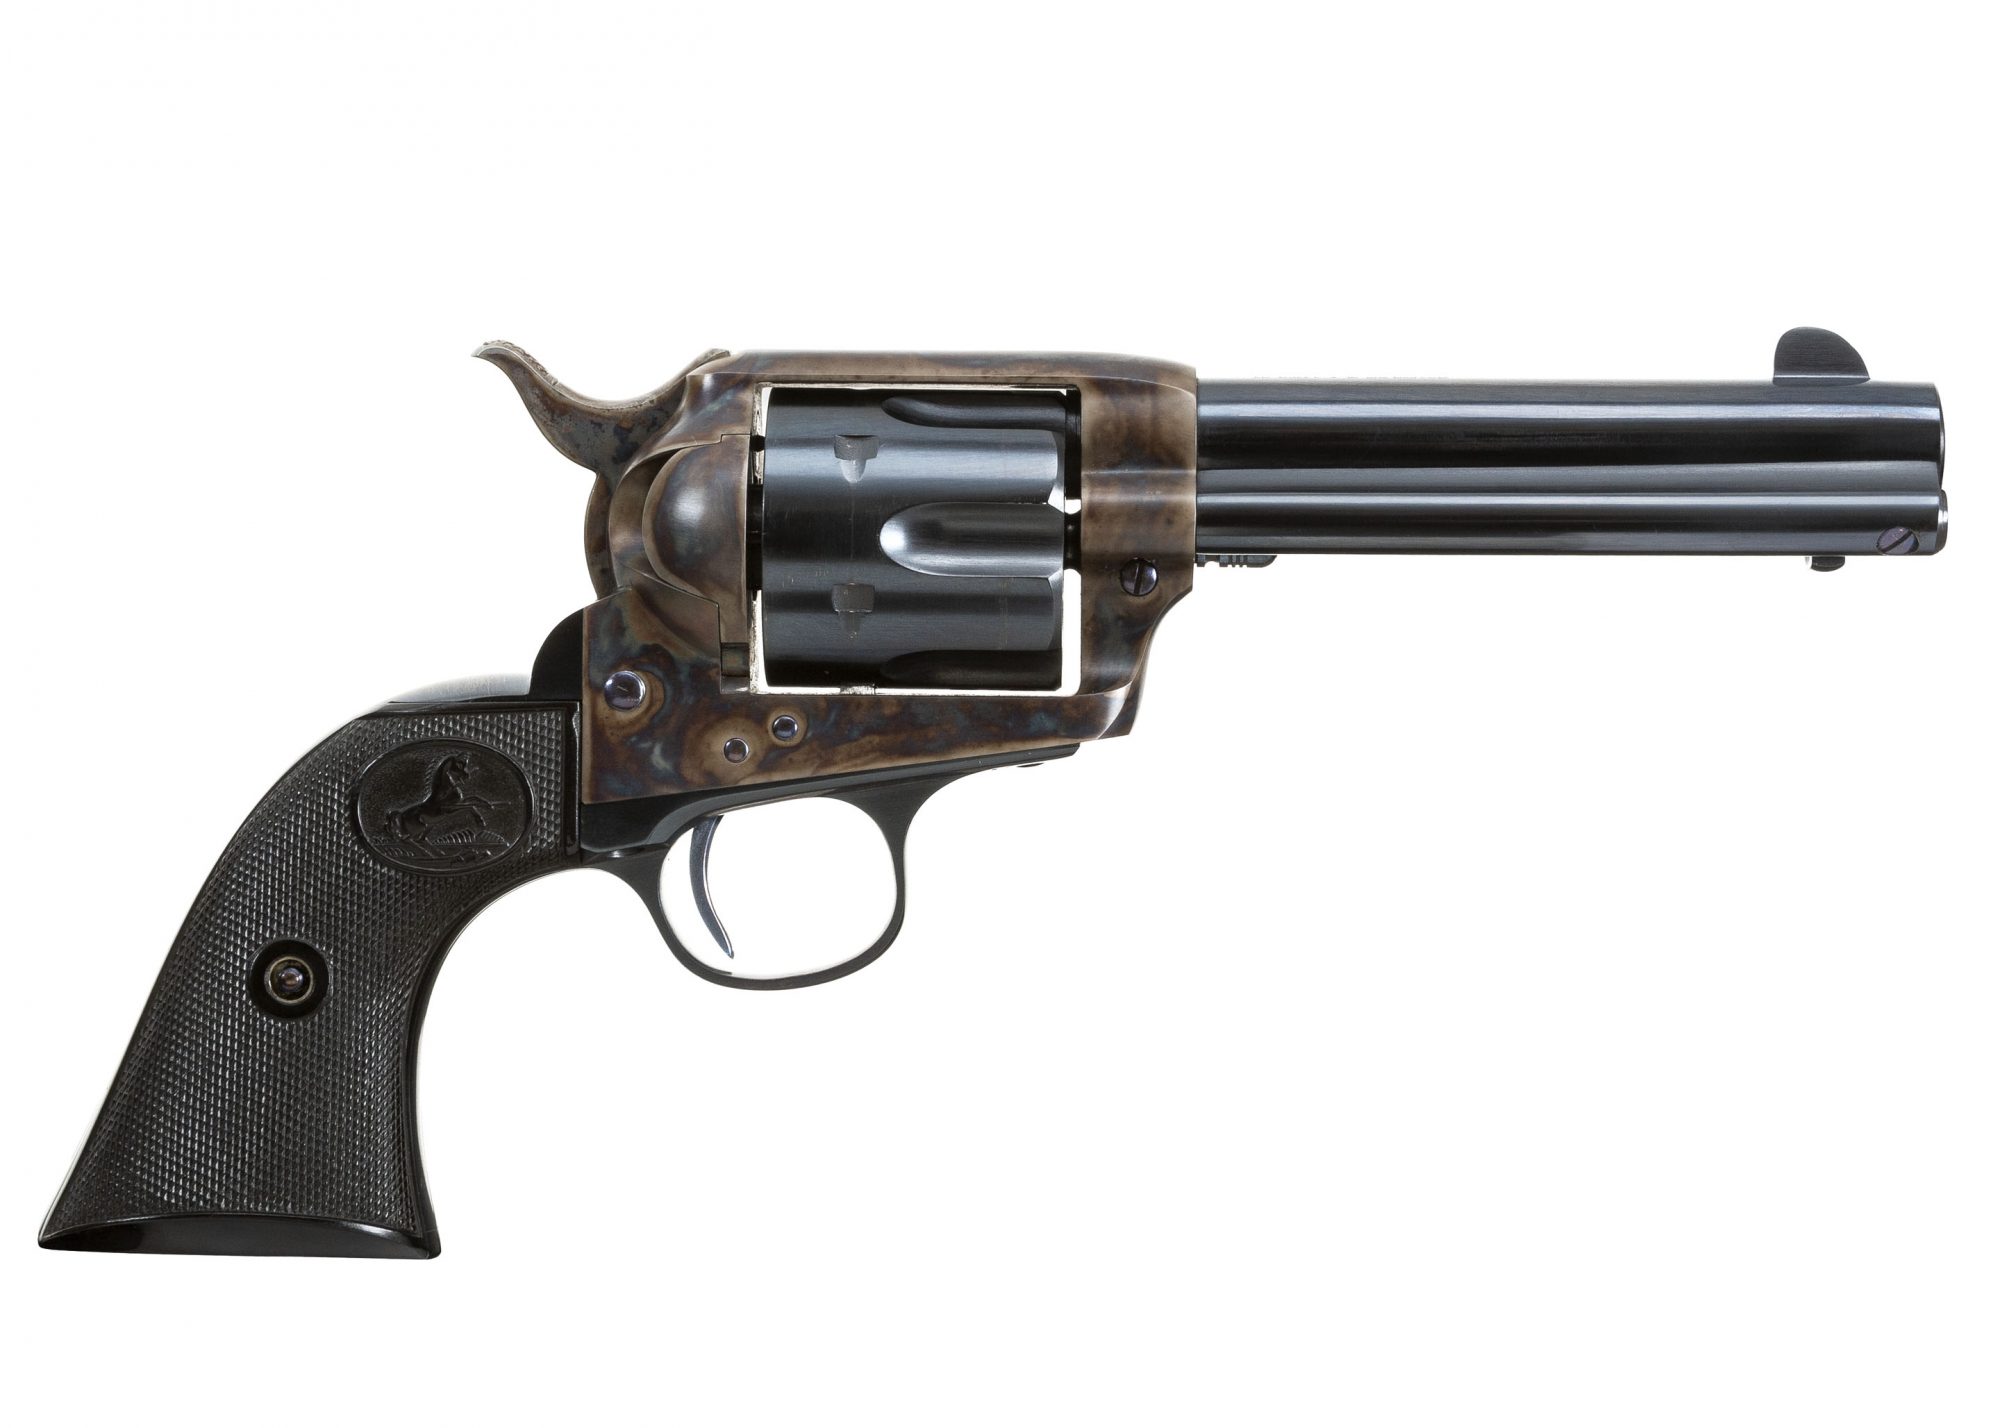 Photo of a Colt Single Action Army Revolver from 1899, restored by Turnbull Restoration Co. in 2000